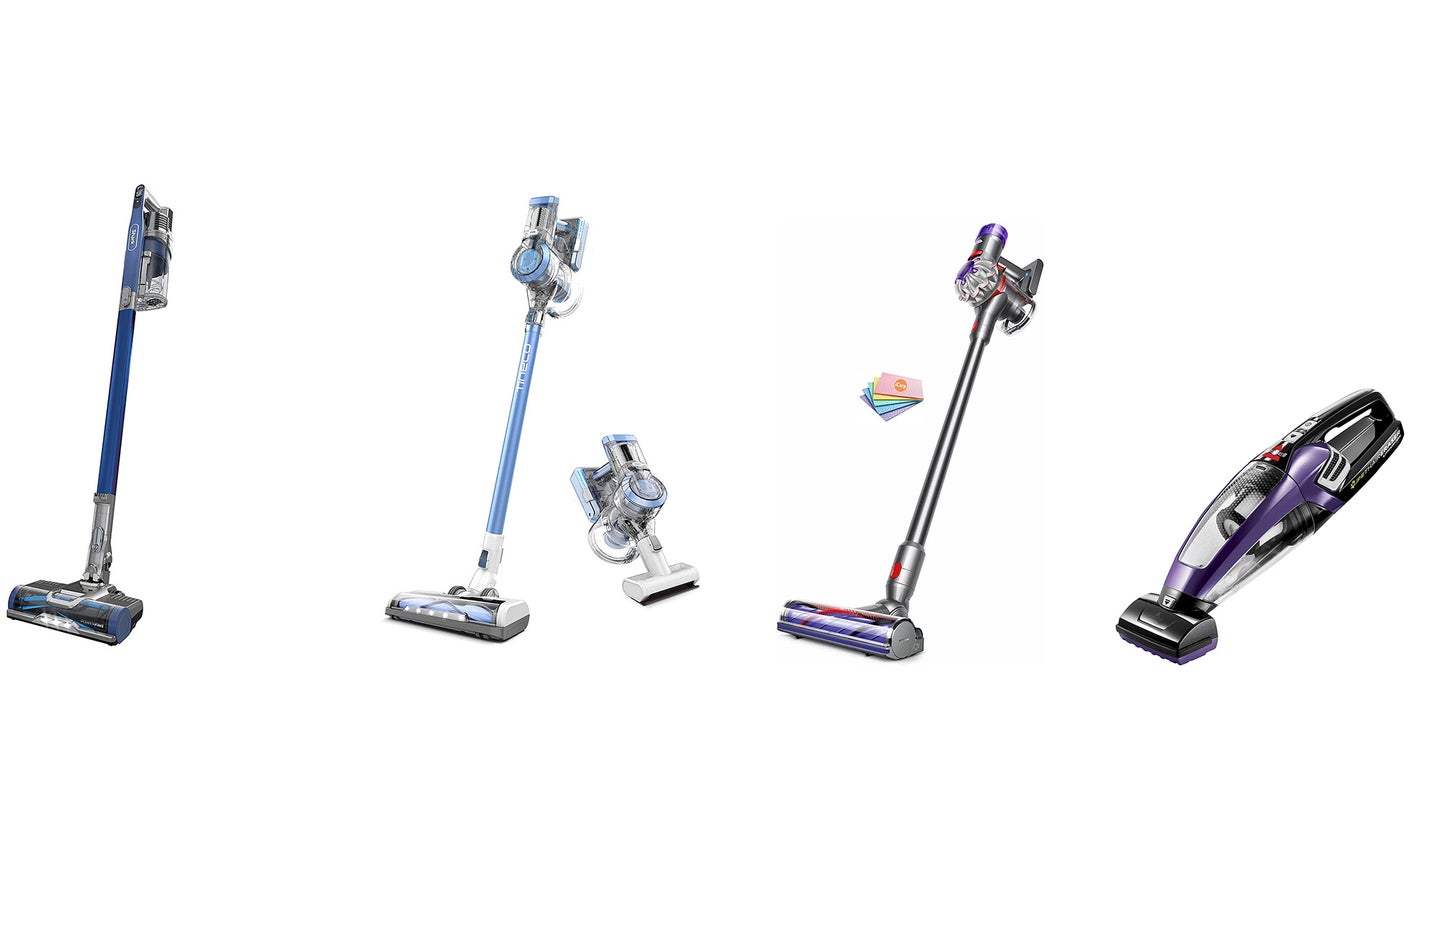 The best cordless vacuums can help make cleanup fast and easy.